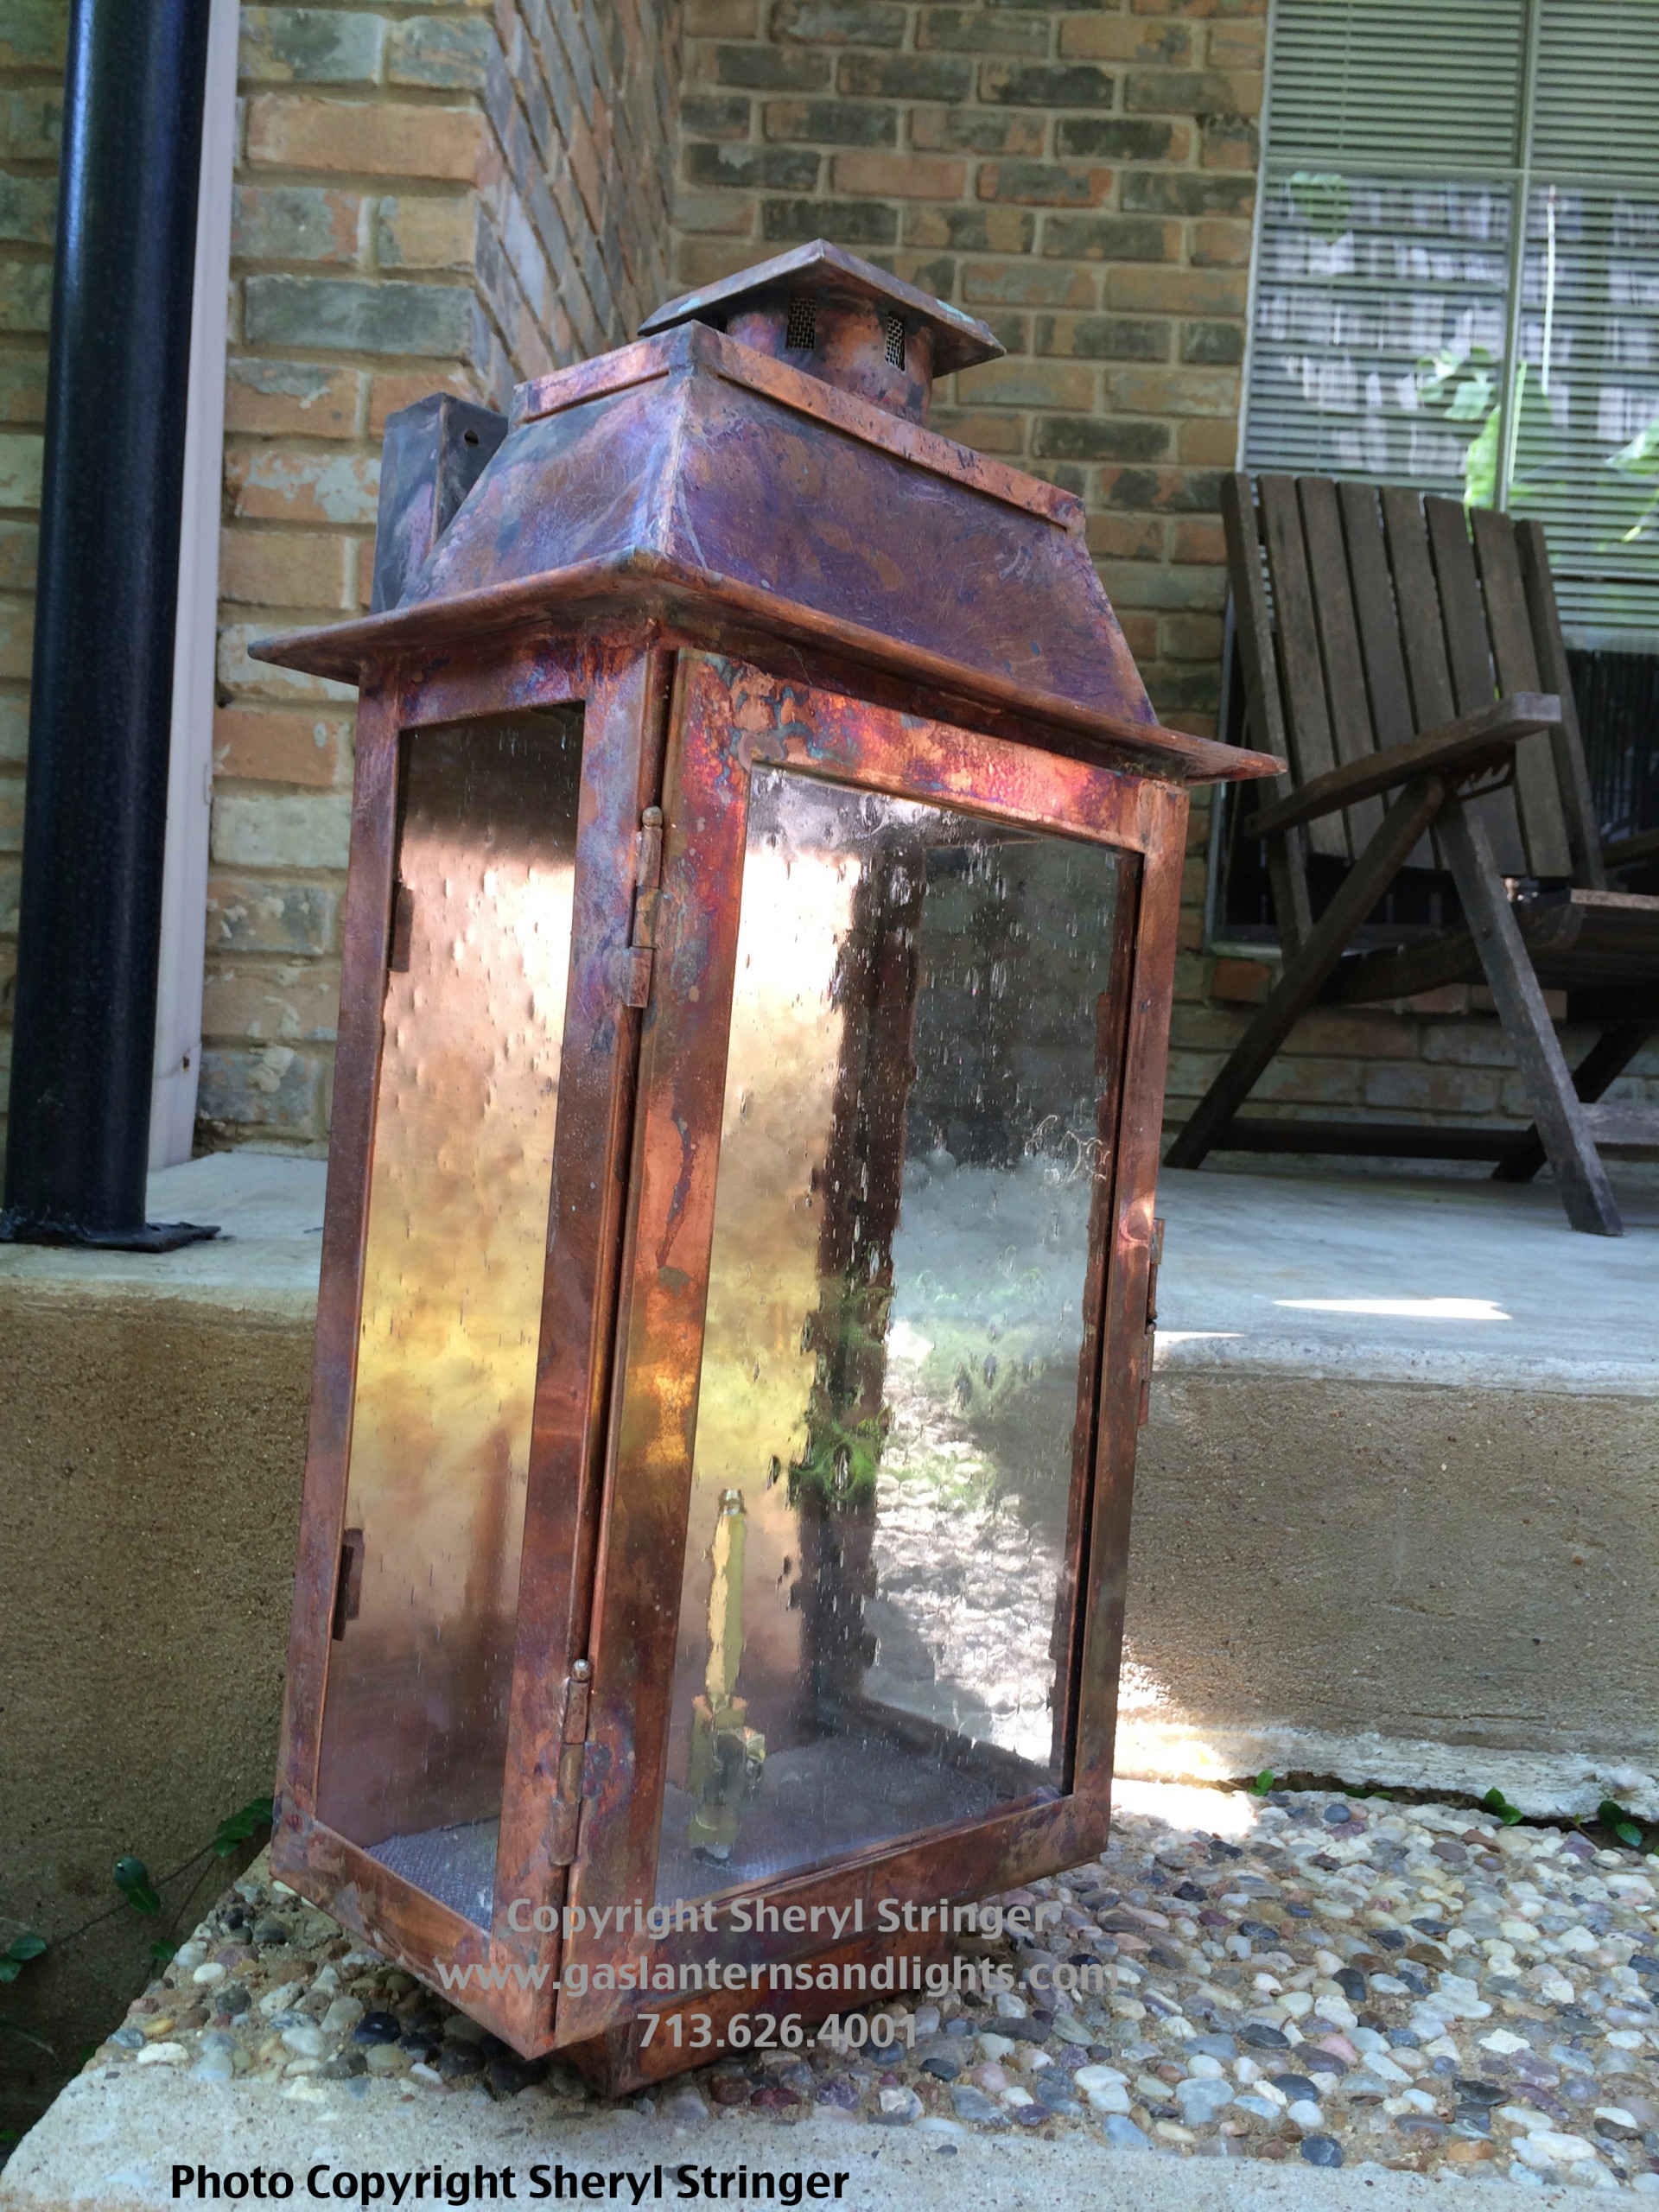 Electric and Gas Lanterns by Sheryl Stringer